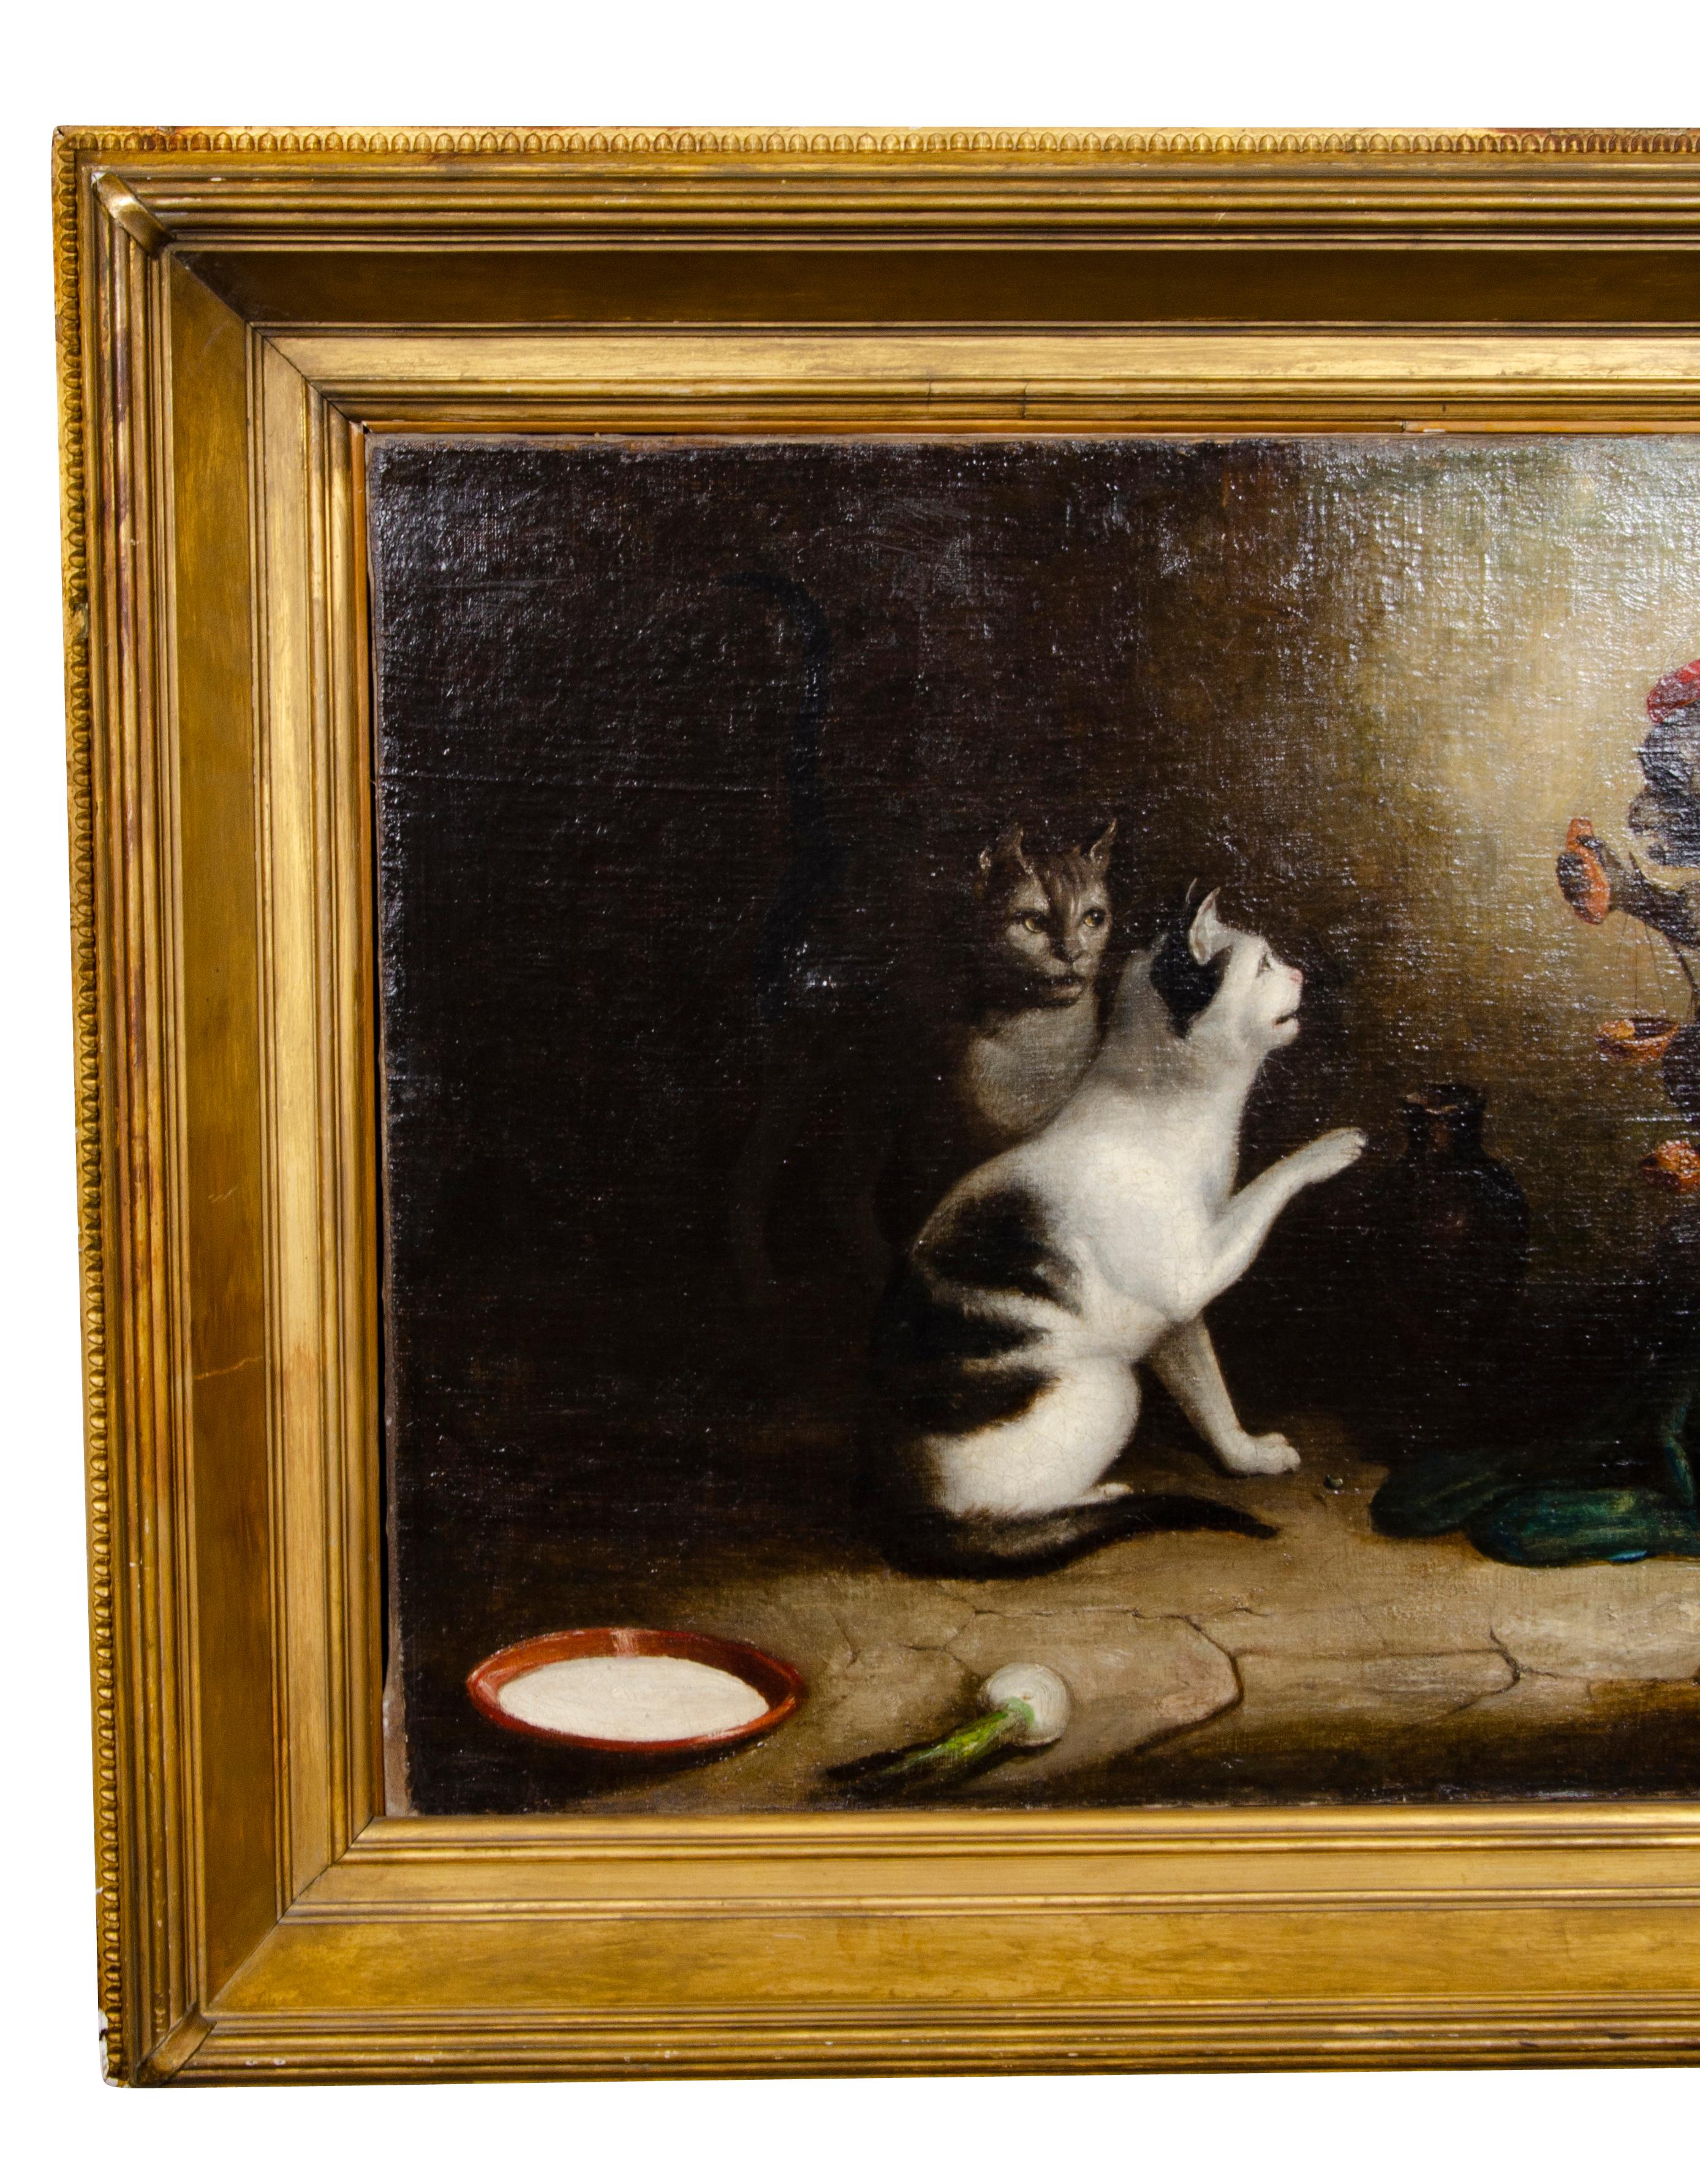 An interior scene with a monkey seated on a stump teasing two cats with what appears to be a fish. With saucer of milk and a turnip in foreground. Relined.